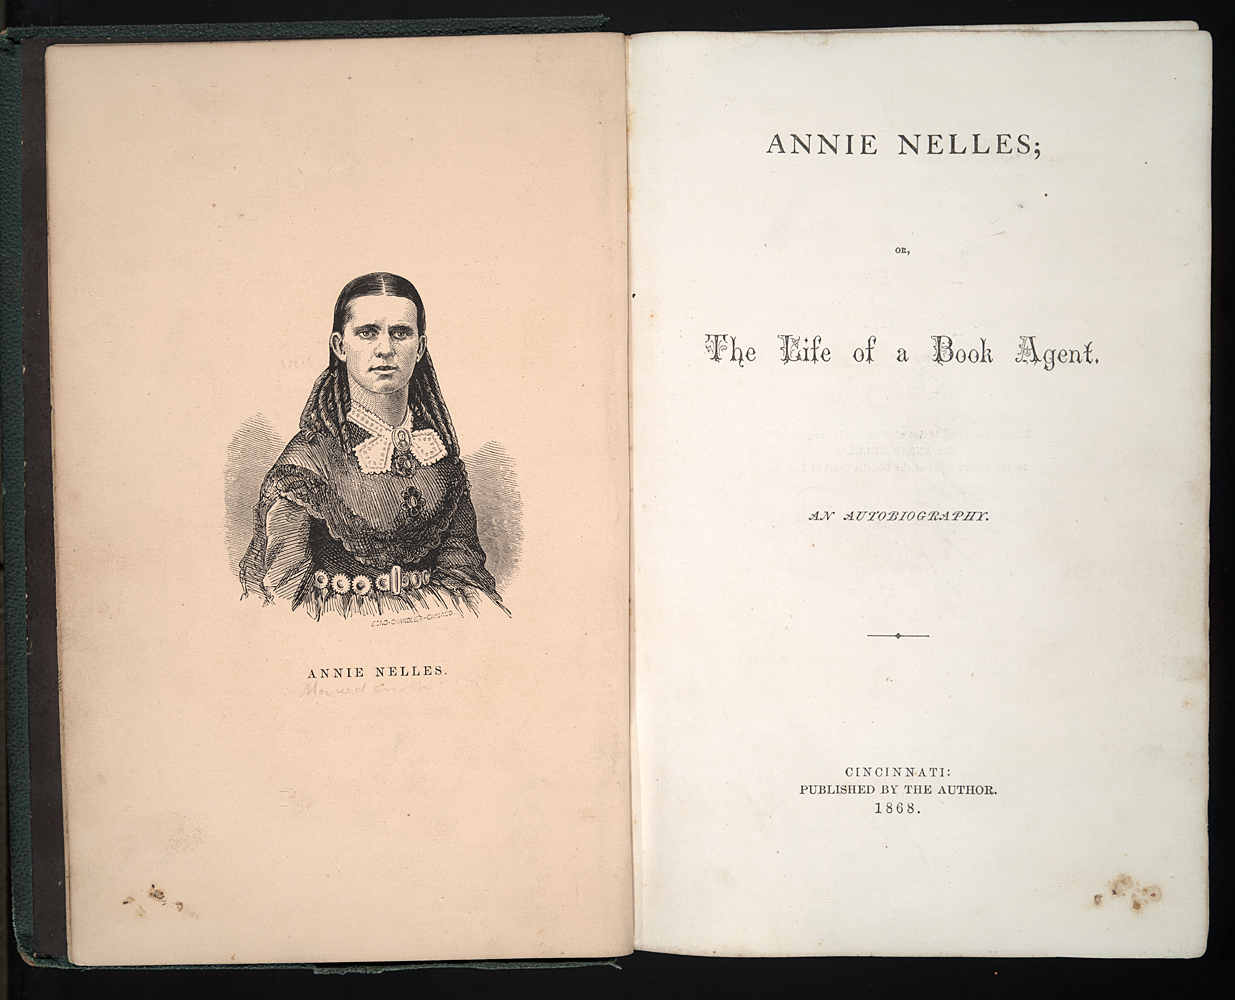 Annie Nelles, or, The Life of a Book Agent: An Autobiography interior cover with illustration of author